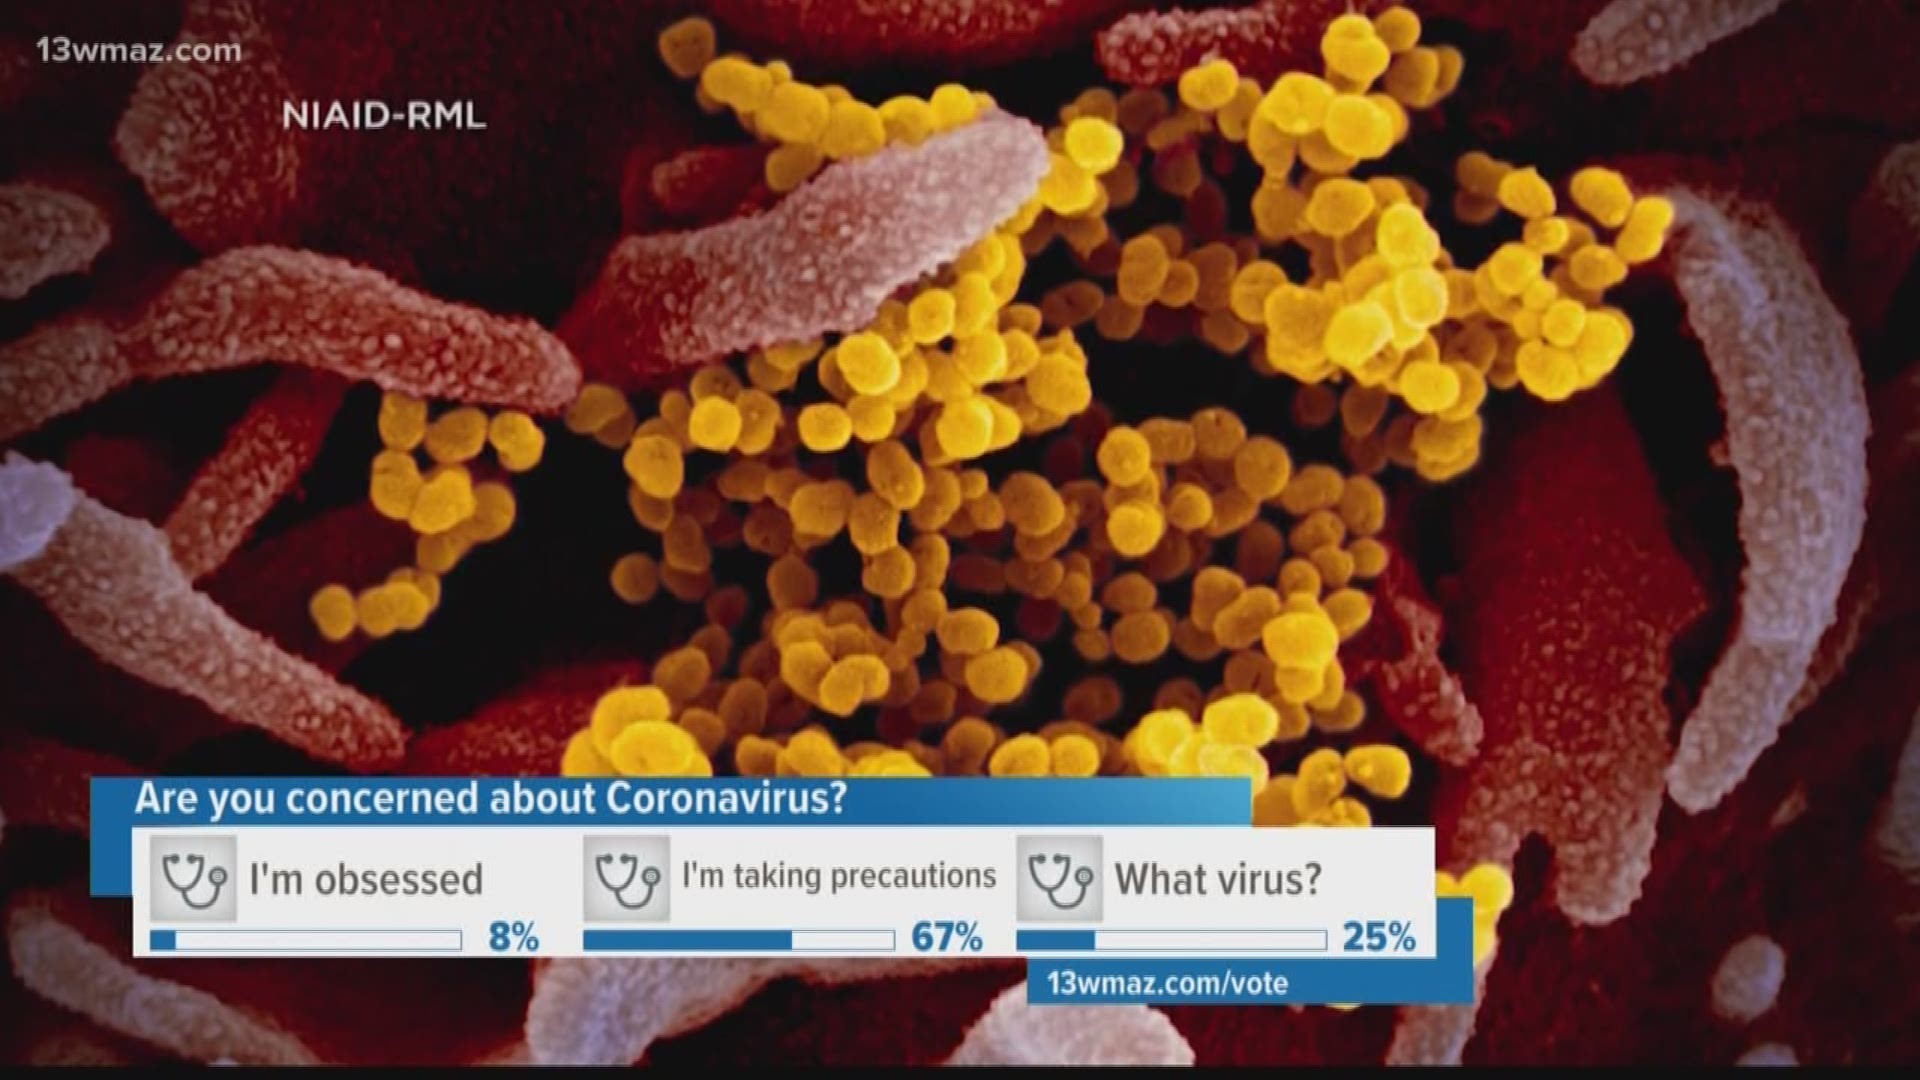 While the state public health department says the overall risk of coronavirus to the general public remains low, they are reminding people to prepare.